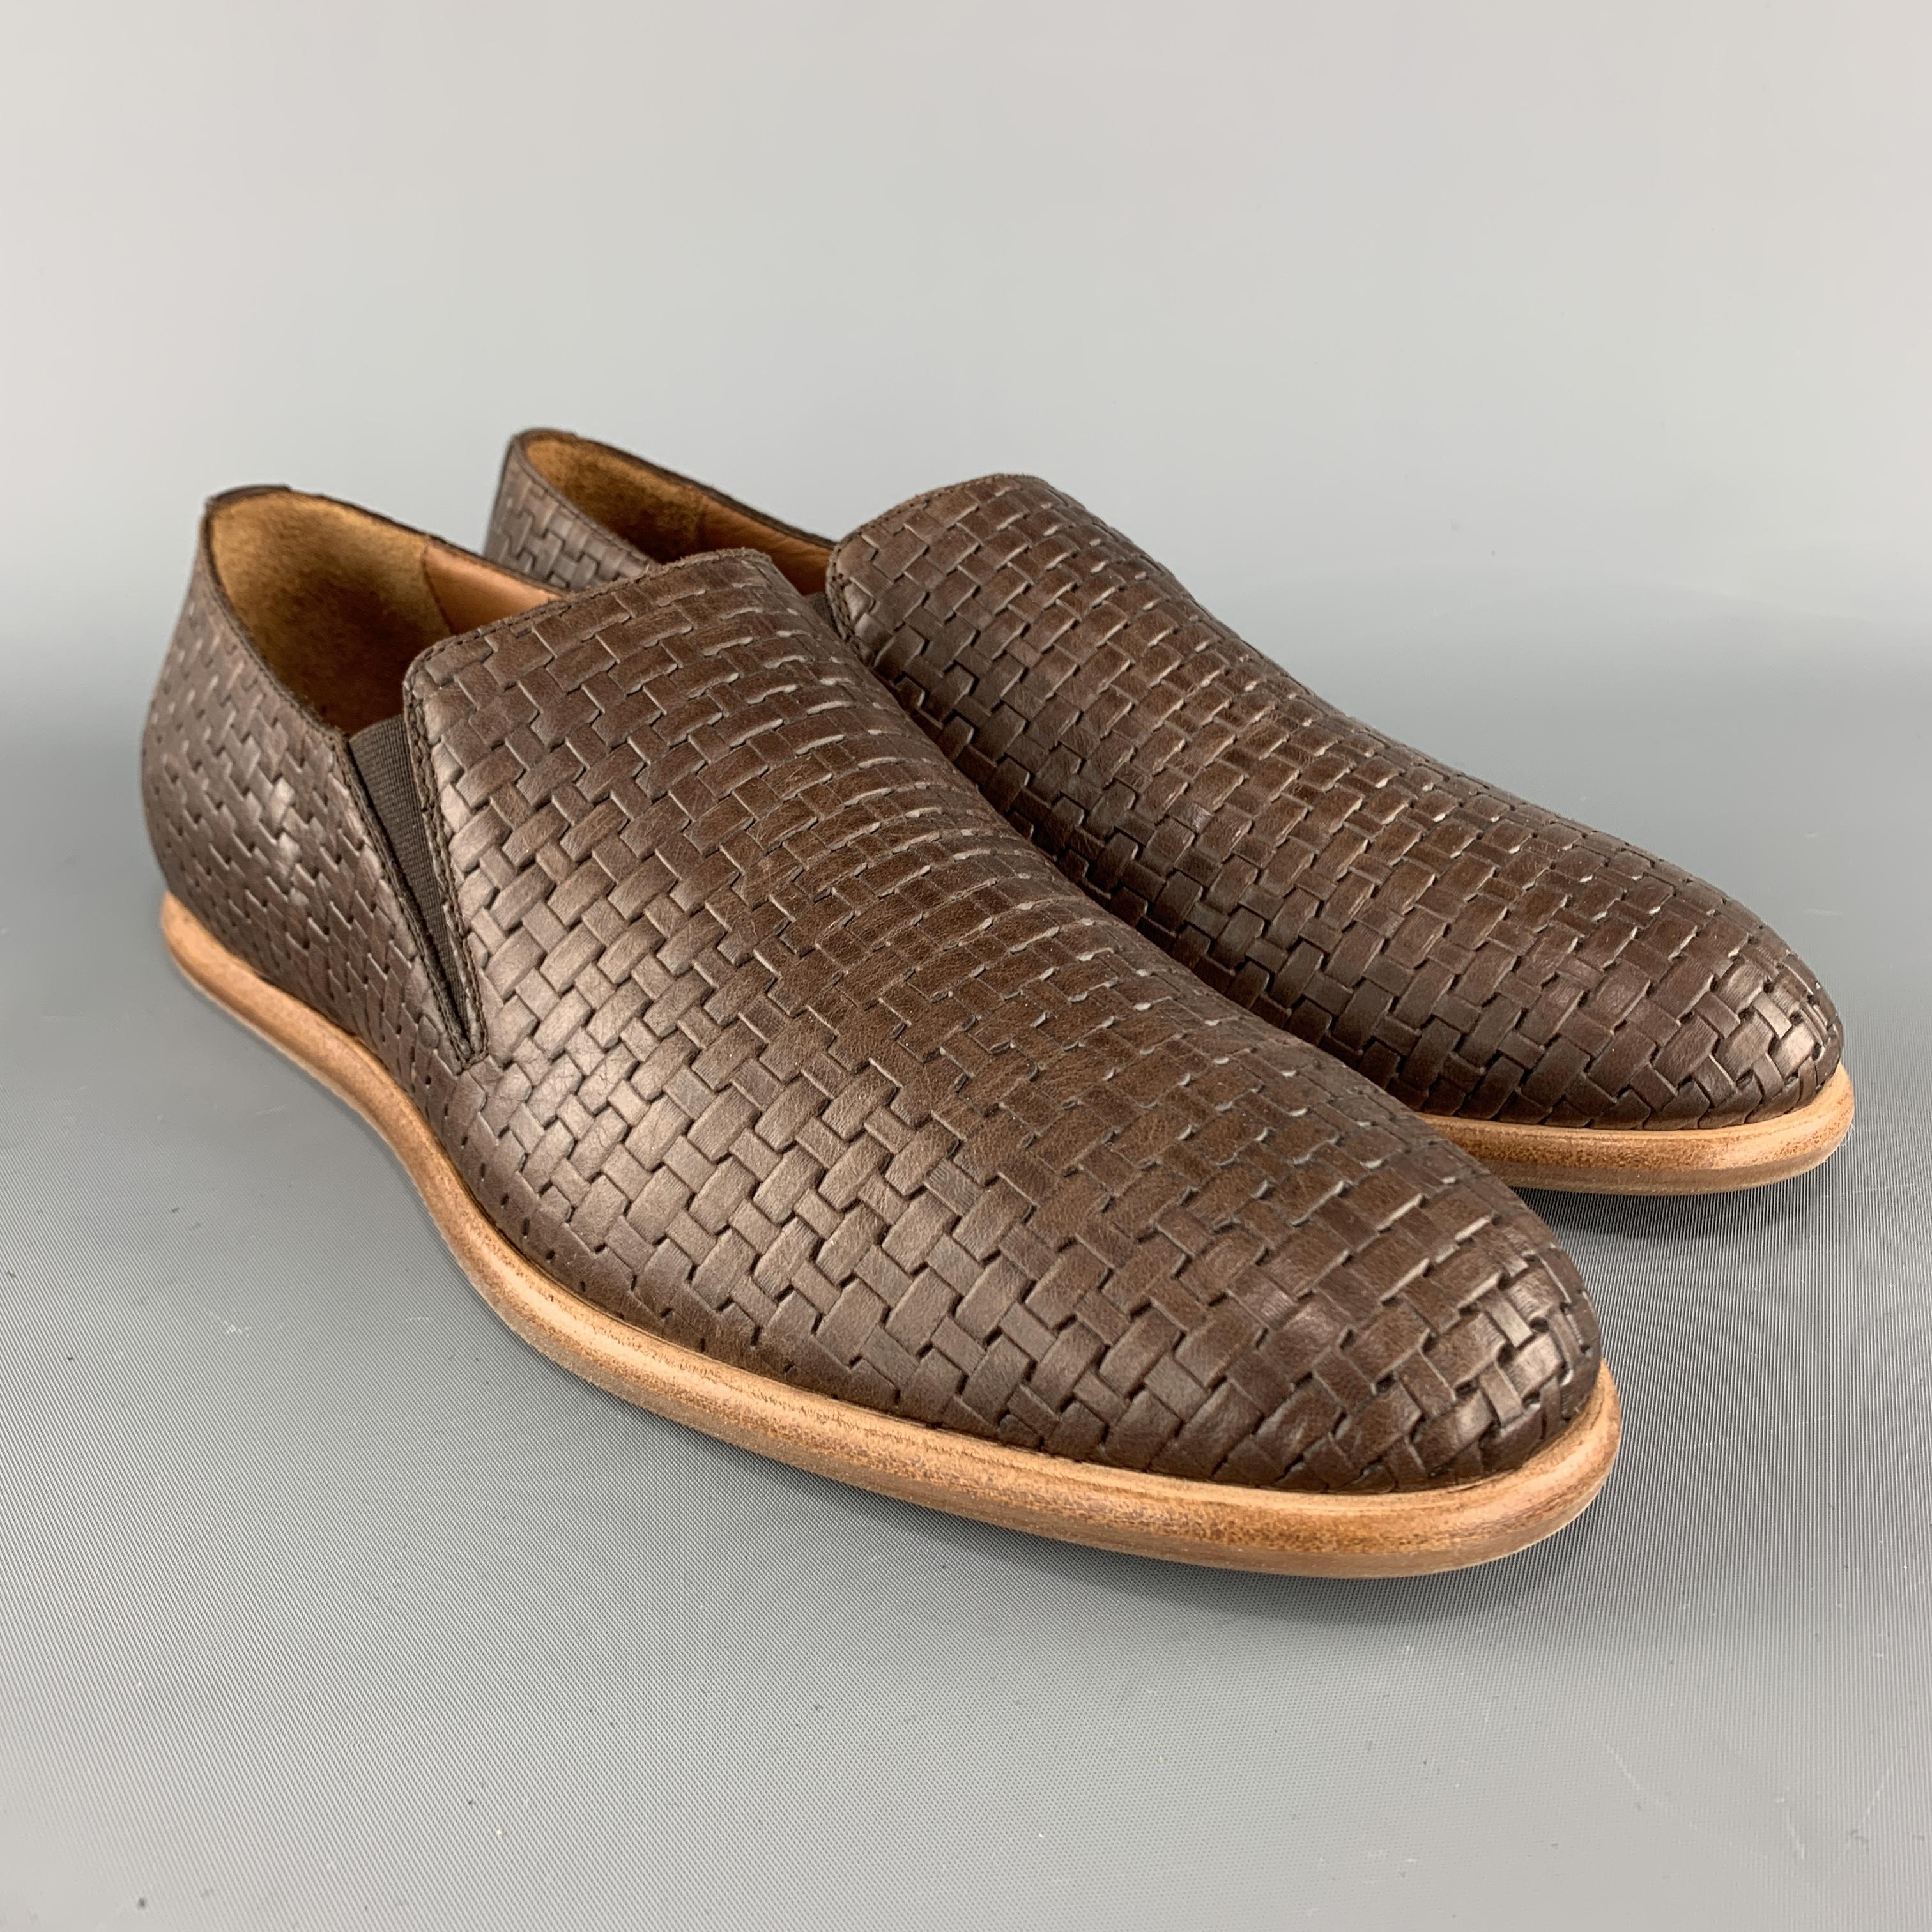 AQUATALIA slip on loafers come in brown woven leather with a tan sole. Made in Italy.

Brand New.
Marked: USA 10

Outsole: 12 x 4.25 in.